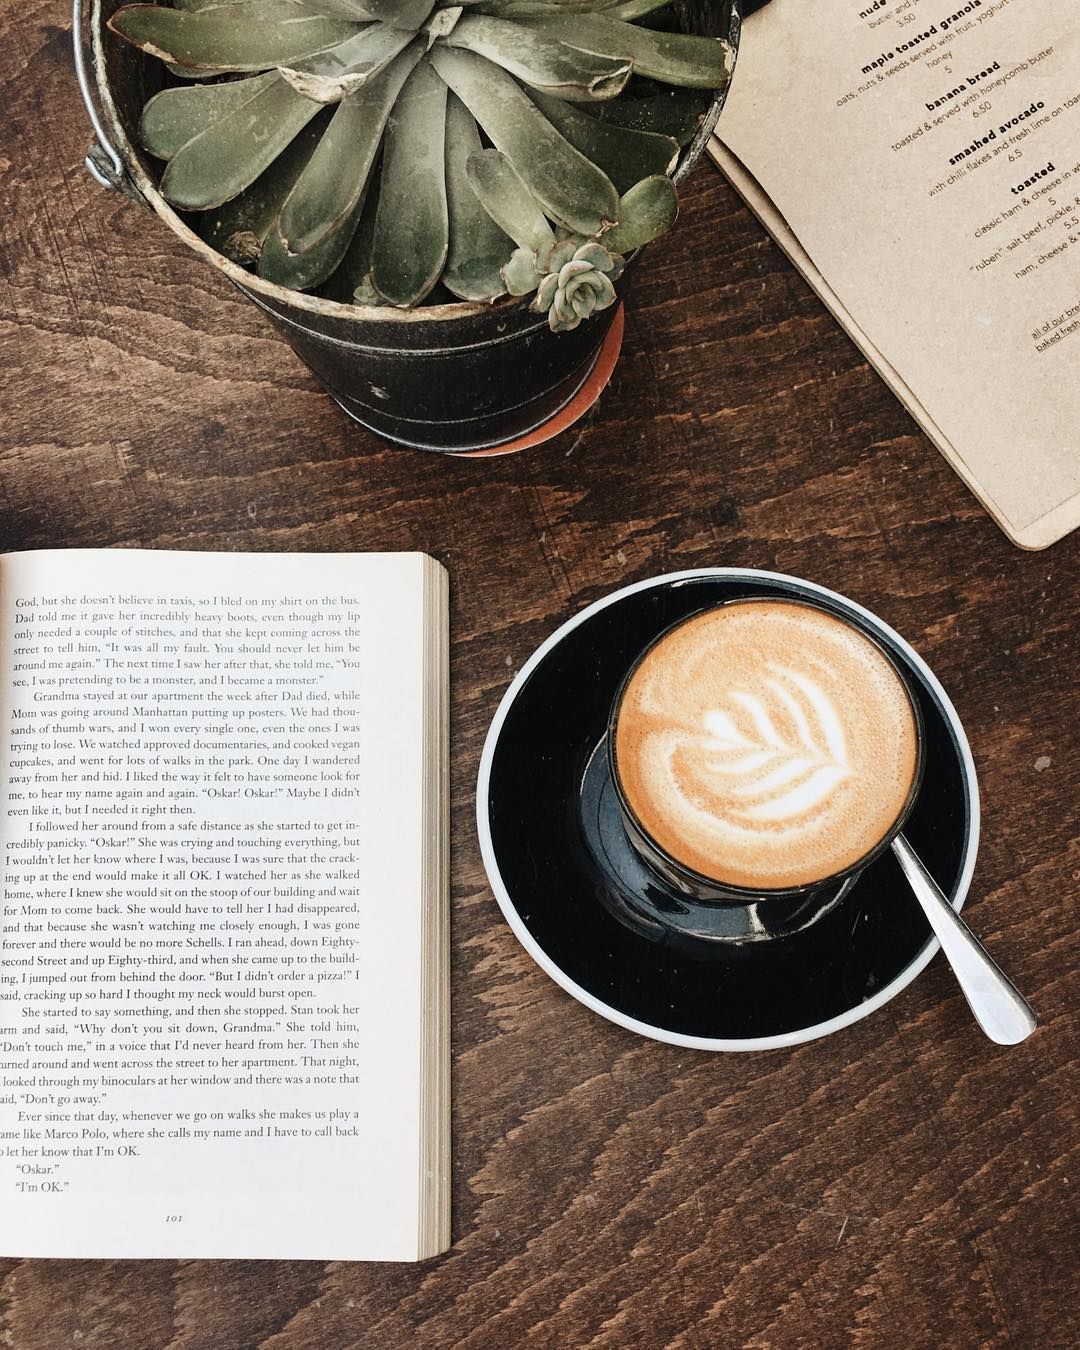 A cozy day in with a good book, latte, and succulent. - Coffee